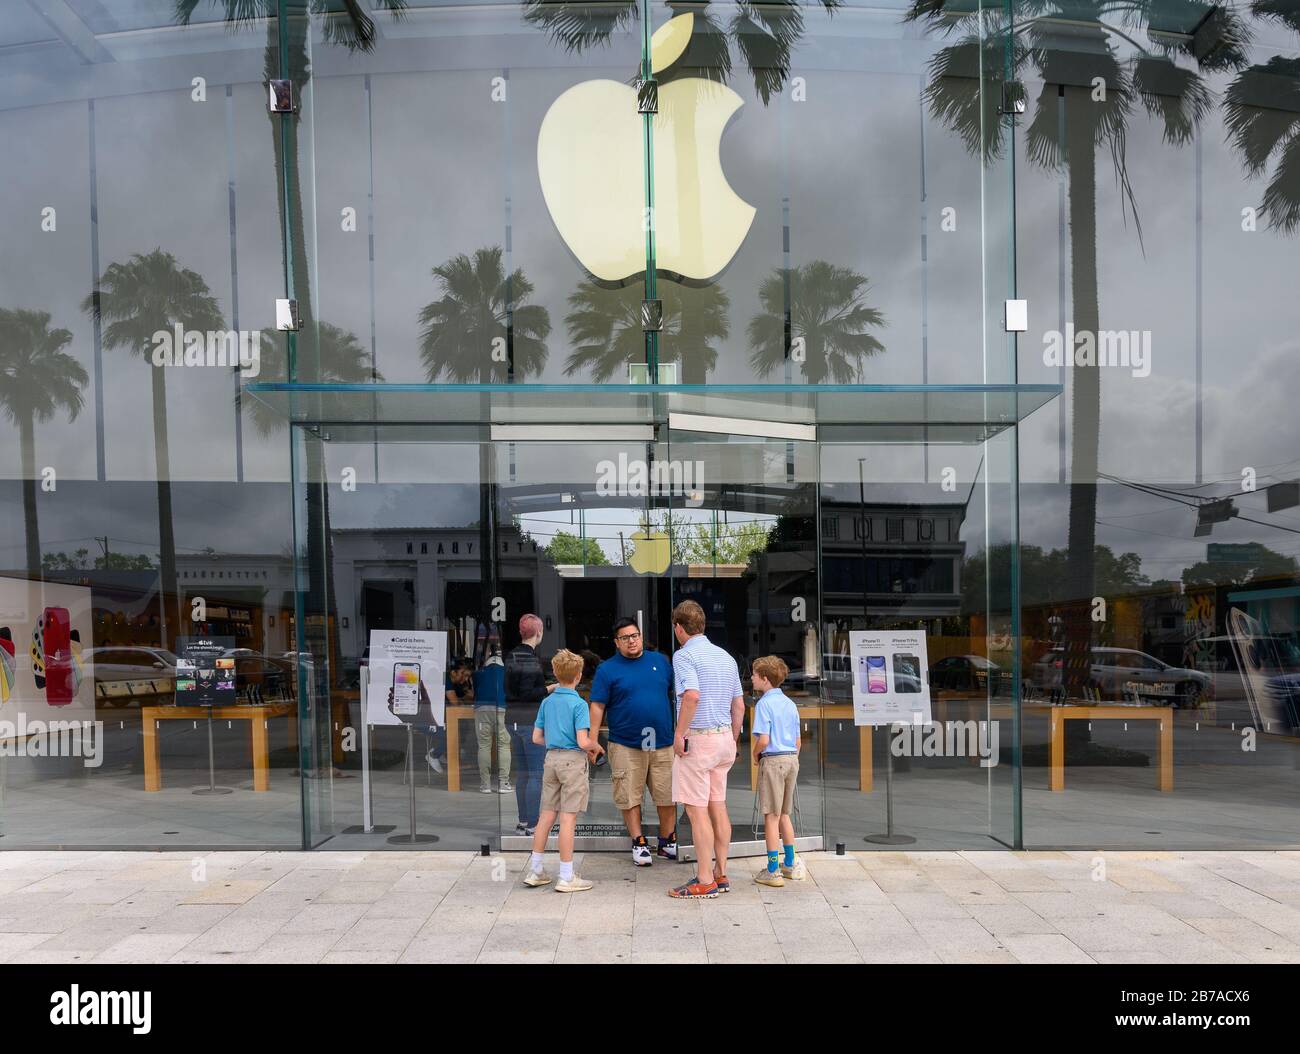 Houston, Texas, USA. 14 March 2020. View of the Apple Store in Houston, Texas  after the shut down of Apple Stores outside of China, Apple  employee alerting customers of store shutdown due to Coronavirus on March 14, 2020, Houston, Texas. Stock Photo